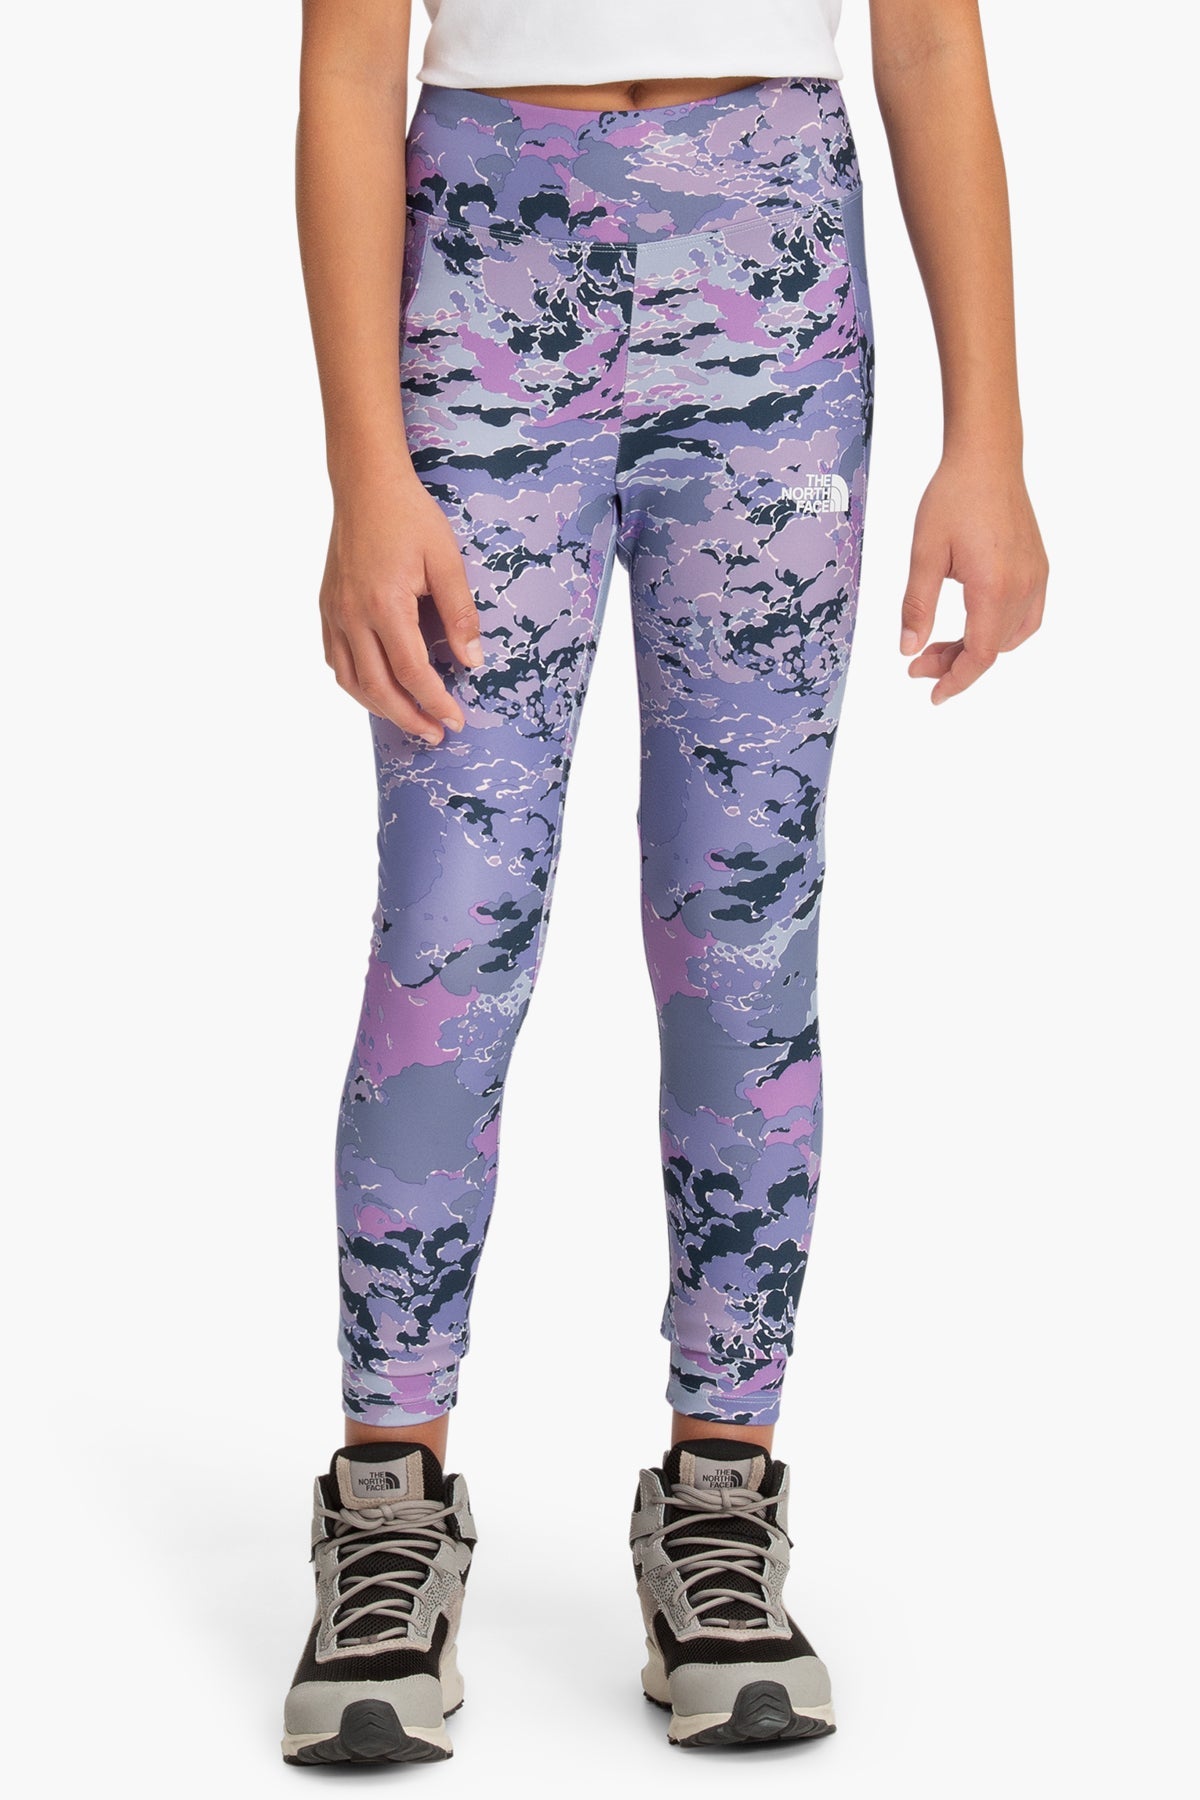 NEW The North Face Big Girls' On Mountain Pink Floral Leggings Tight Pants